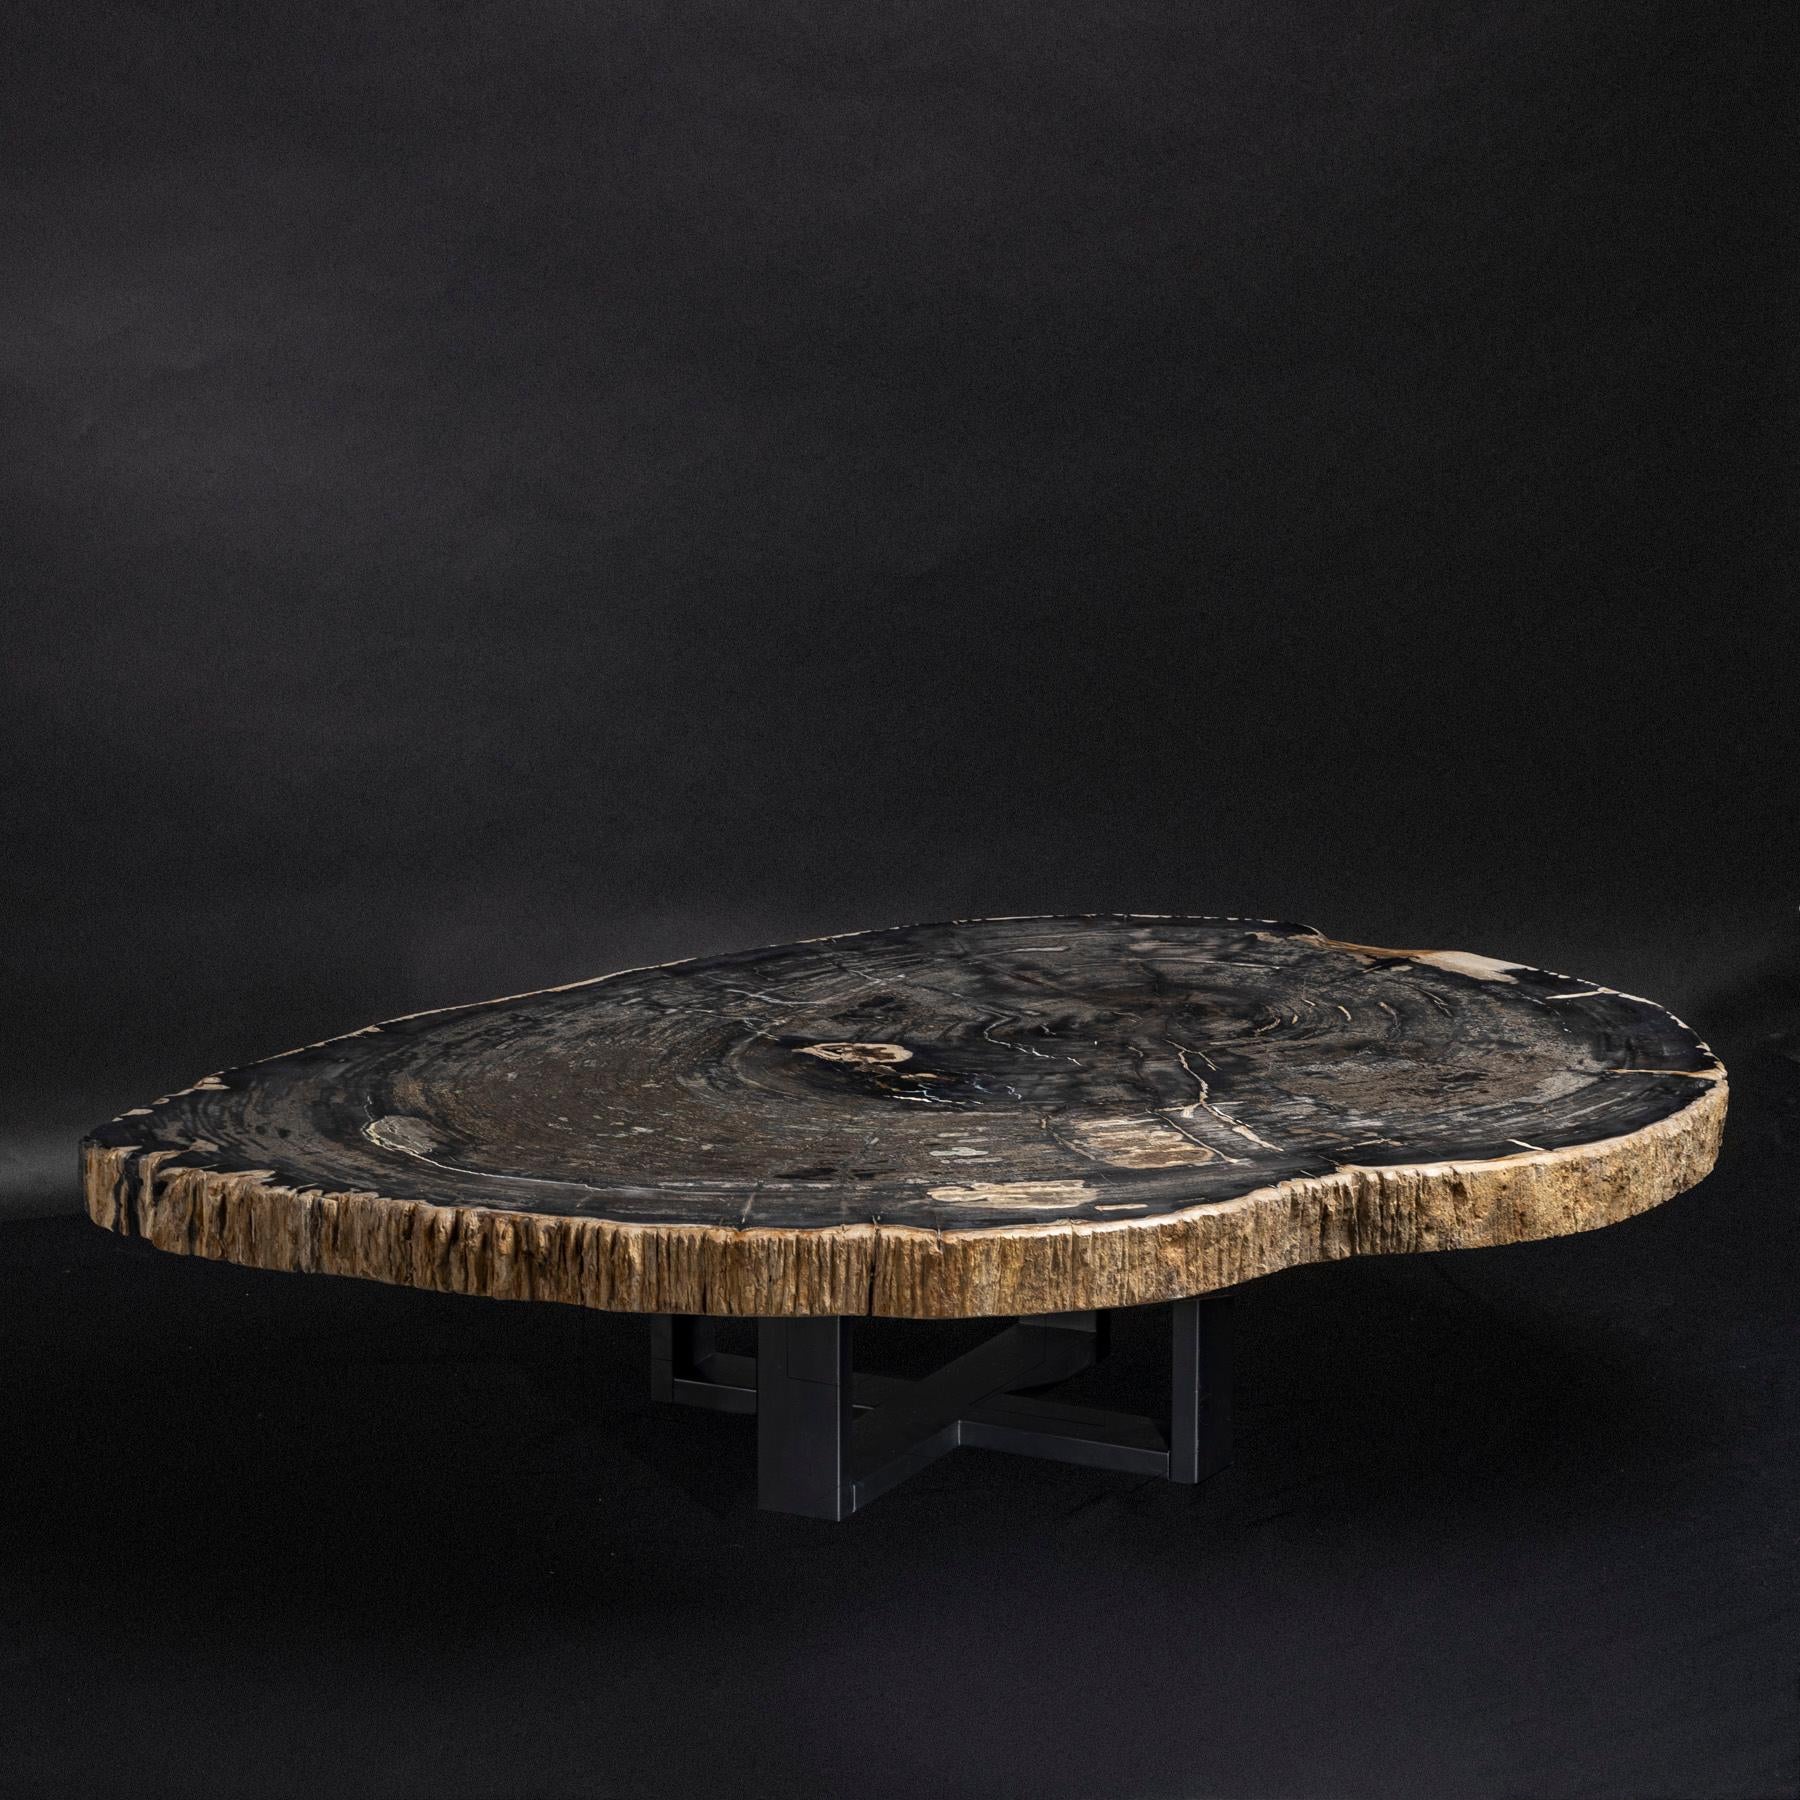 Organic Modern Center or Coffee Table, Natural Oval Shape, Petrified Wood with Metal Base